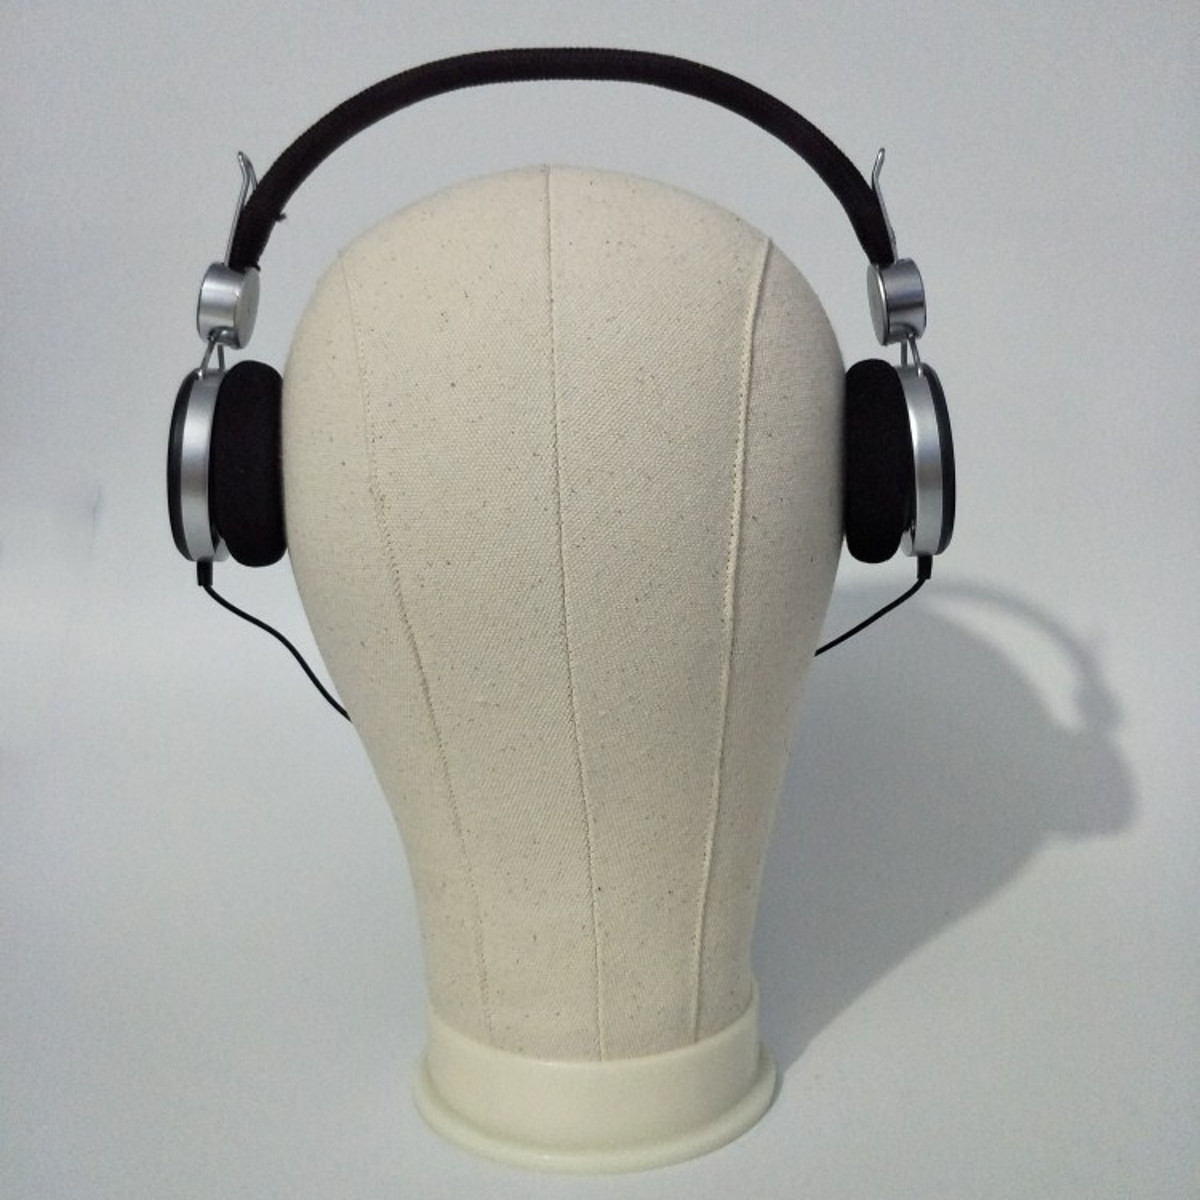 20-25-Canvas-Block-Head-Set-with-Mount-Hole-Plate-Mannequin-Model-Cap-Wigs-Jewelry-Display-Stand-1445404-10